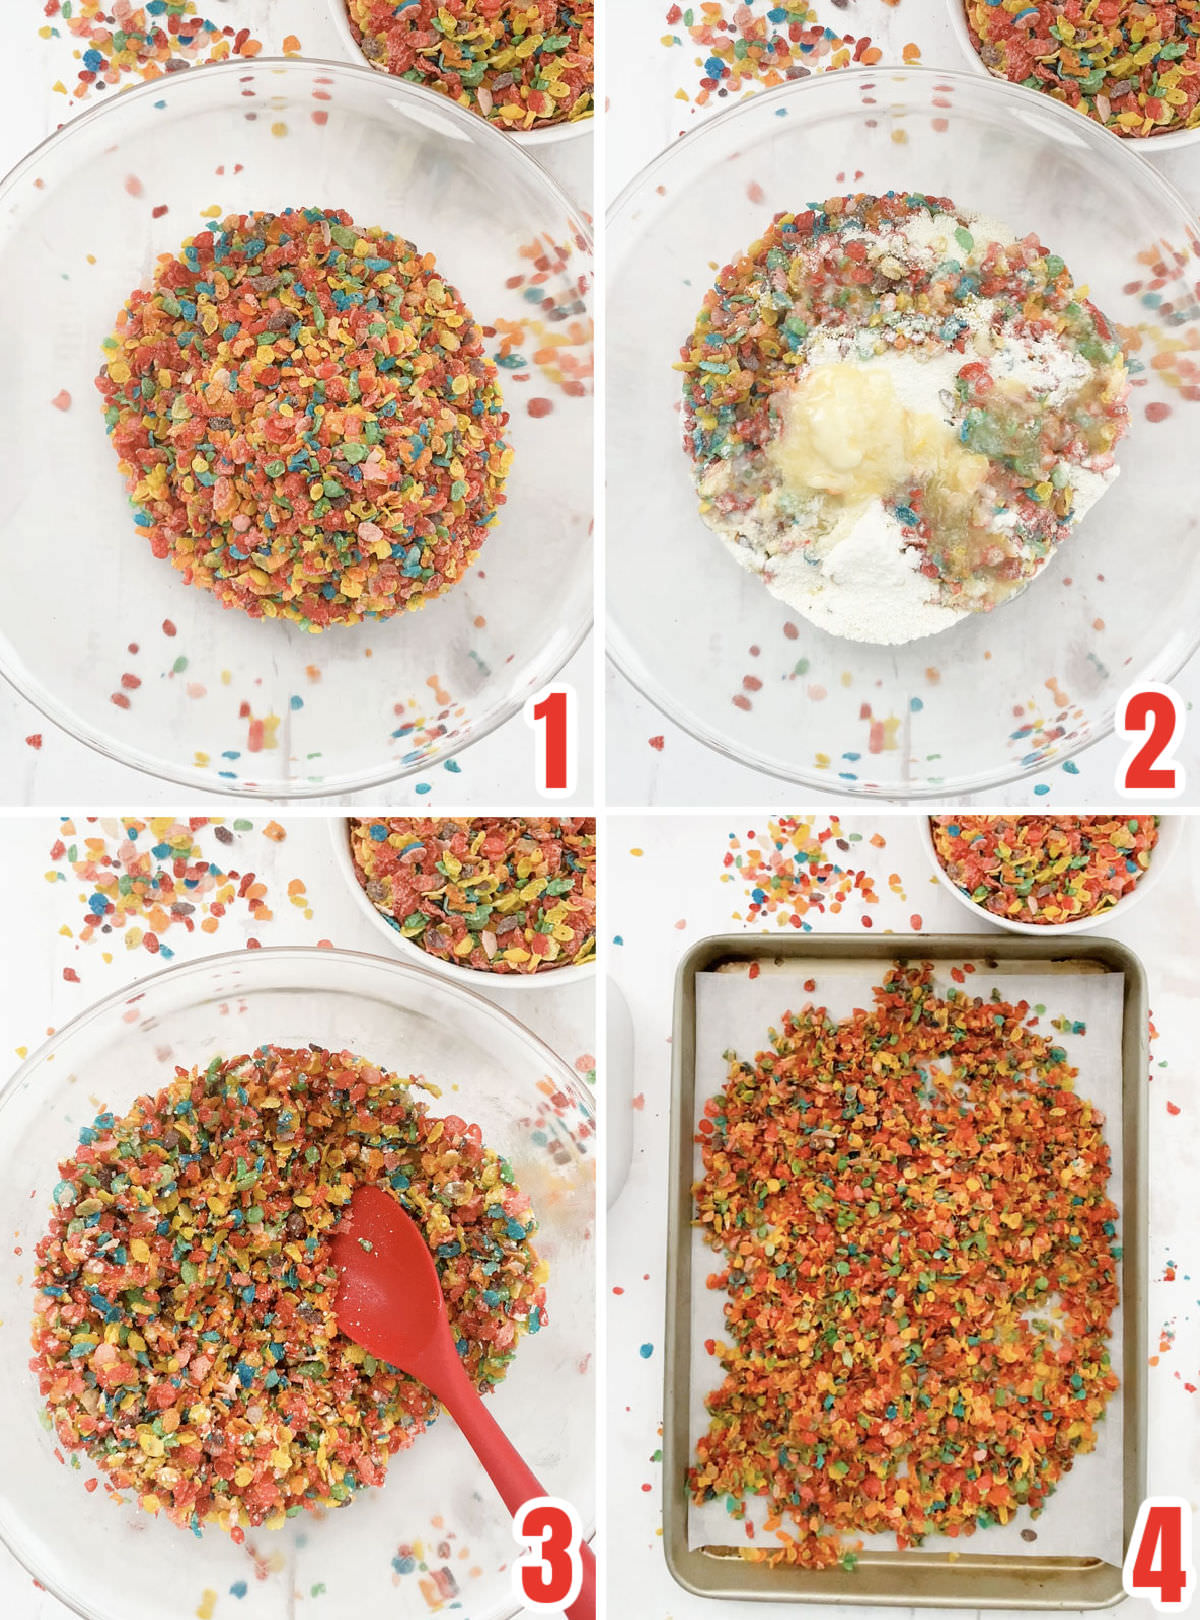 Collage image showing how to make the Fruity Pebbles Crumble.